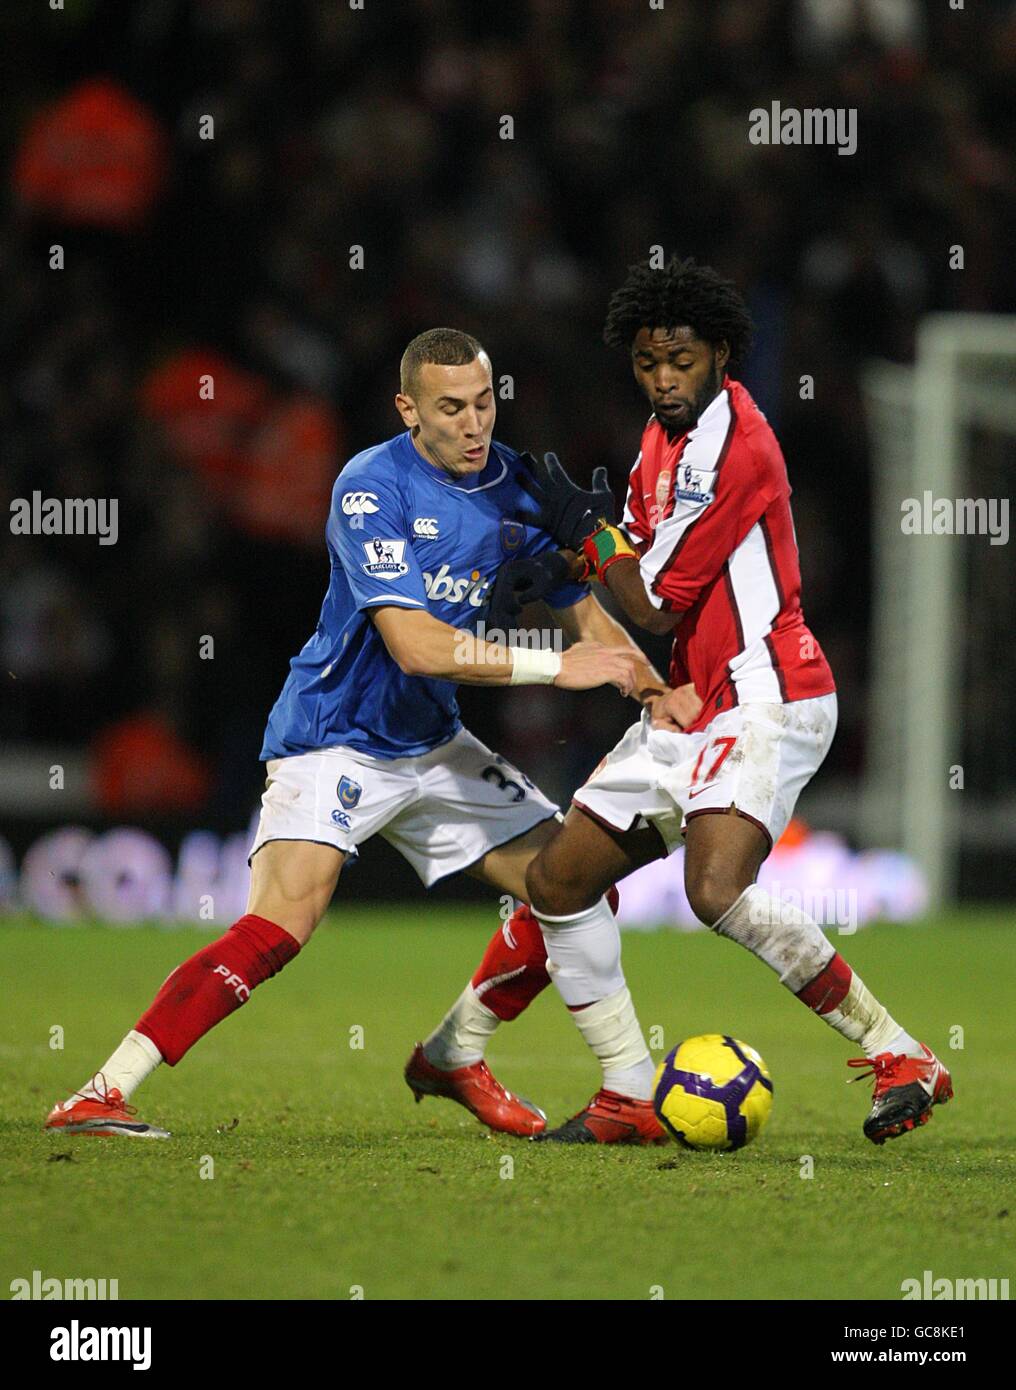 Soccer - Barclays Premier League - Portsmouth v Arsenal - Fratton Park. Arsenal's Alexandre Song Billong (right) and Portsmouth's Hassan Yebda (left) battle for the ball Stock Photo